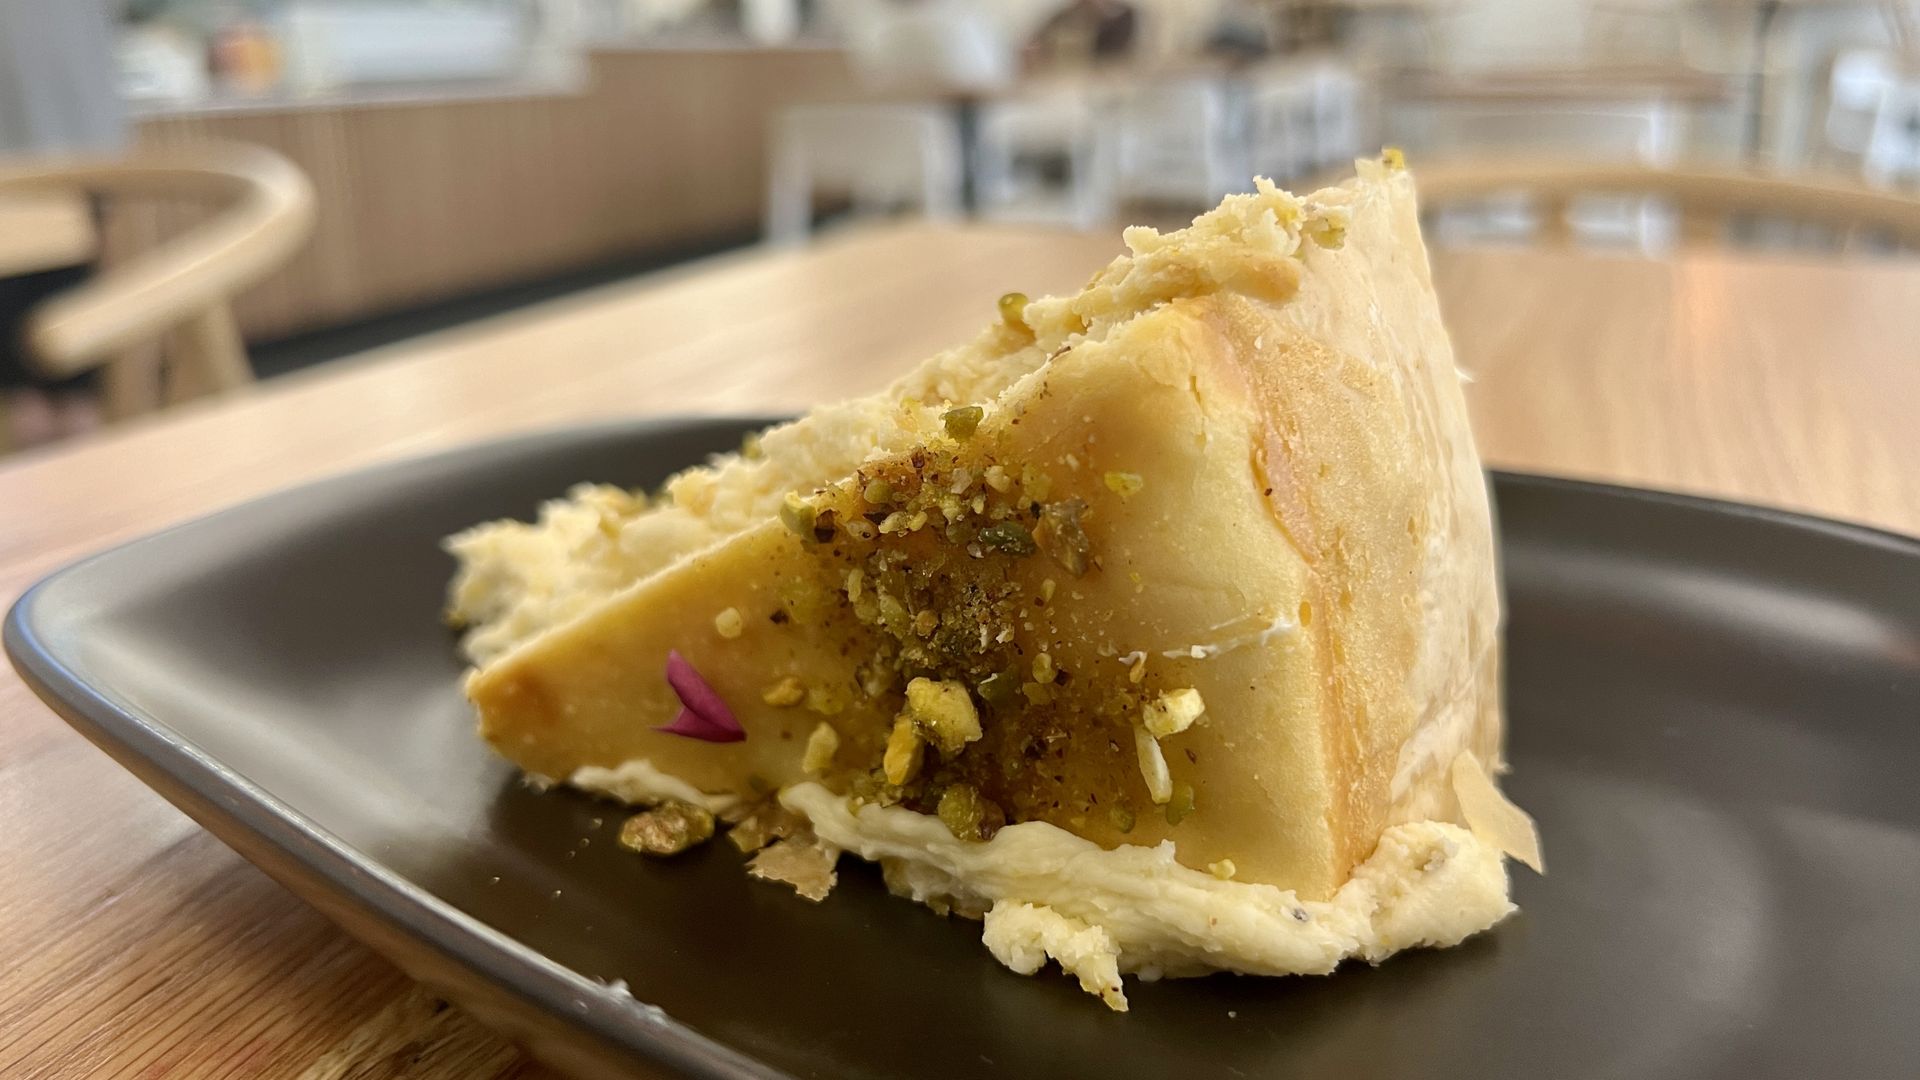 A slice of cheesecake topped with pistachios